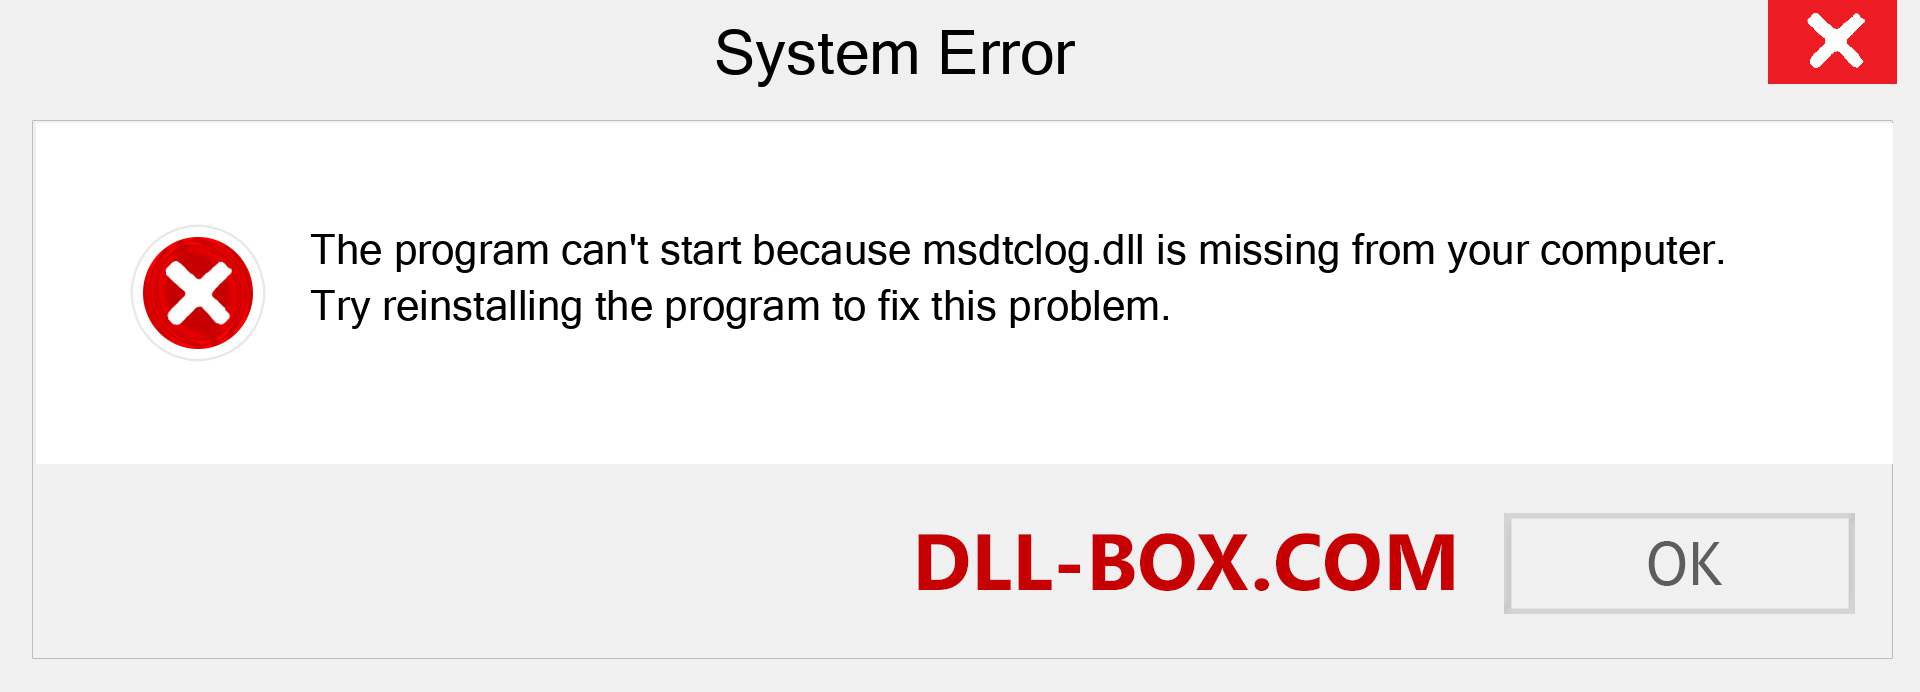  msdtclog.dll file is missing?. Download for Windows 7, 8, 10 - Fix  msdtclog dll Missing Error on Windows, photos, images